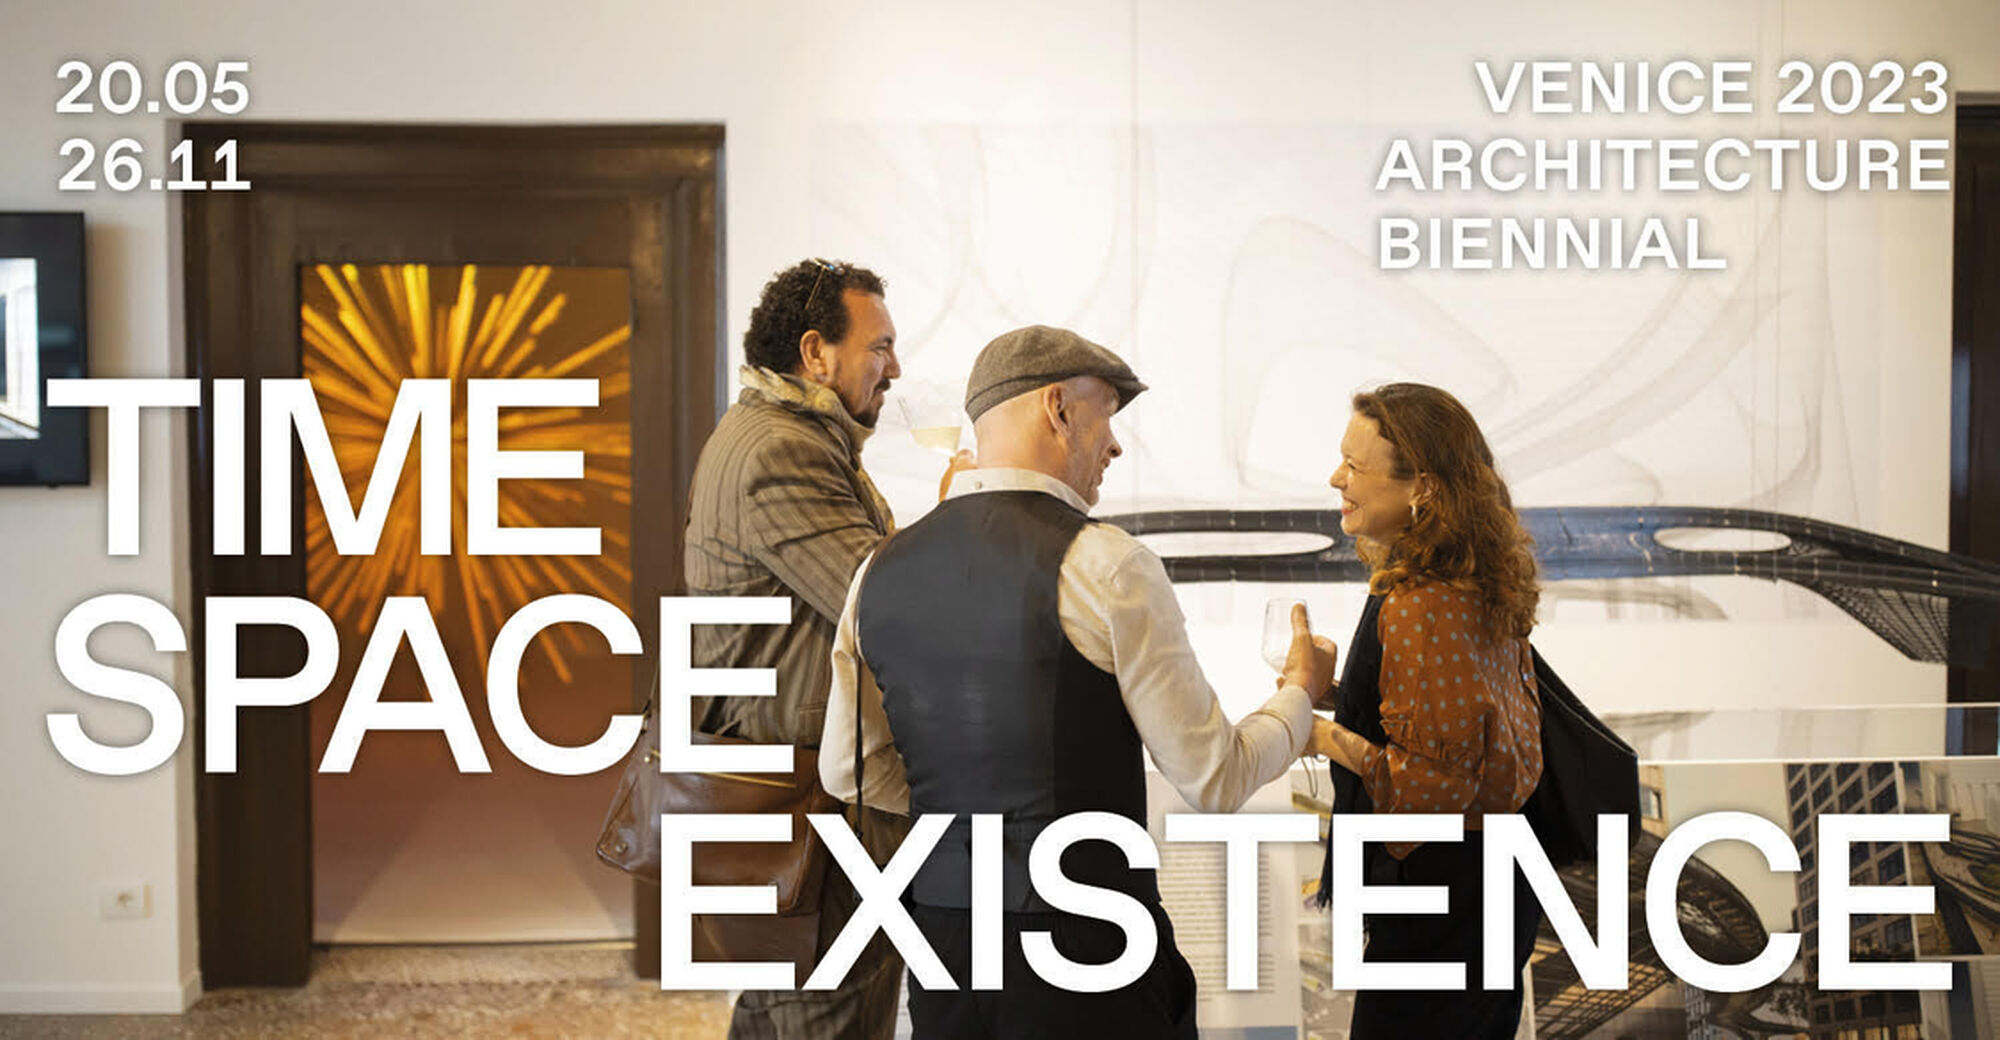 Ausstellung “Time, Space Existance”